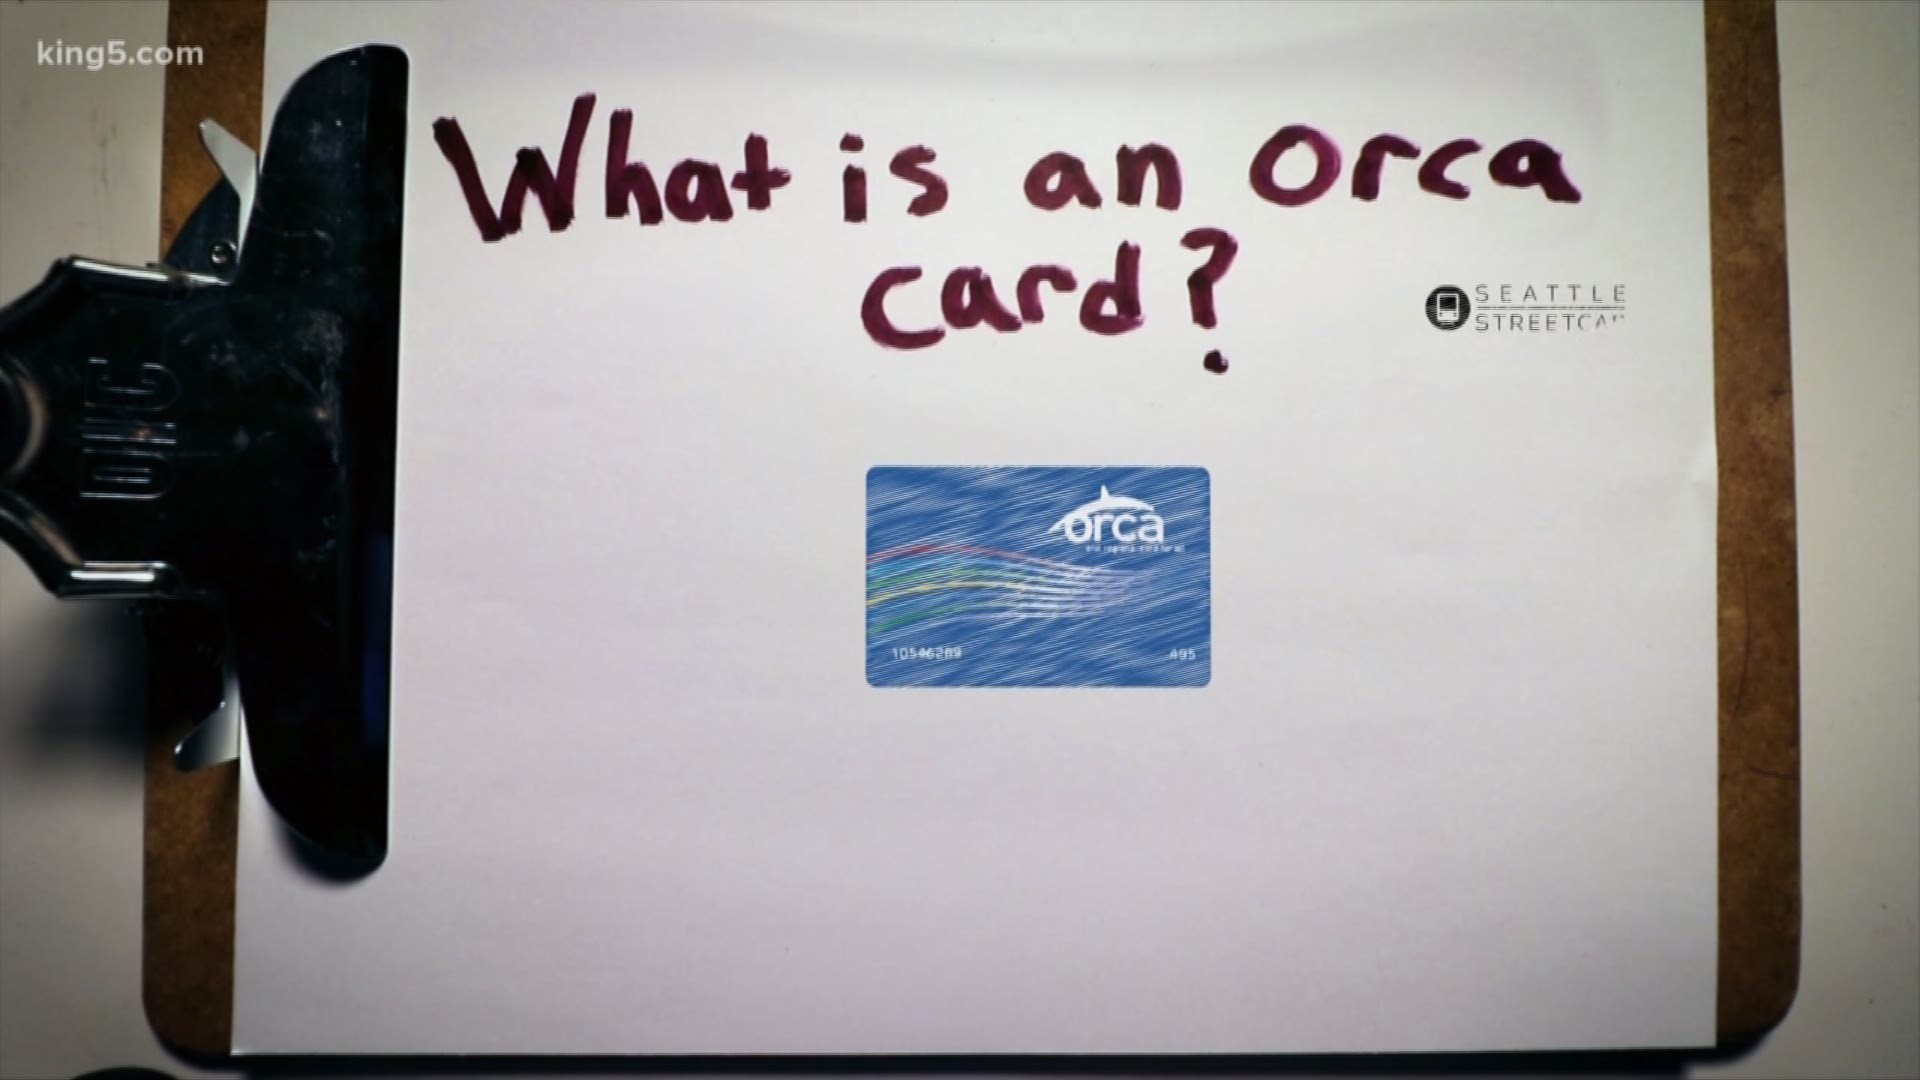 With the viaduct closure imminent, mass transit may be your best option to avoid traffic headaches.  So how can an ORCA card streamline the process for you?  KING 5's Jake Whittenberg explains...